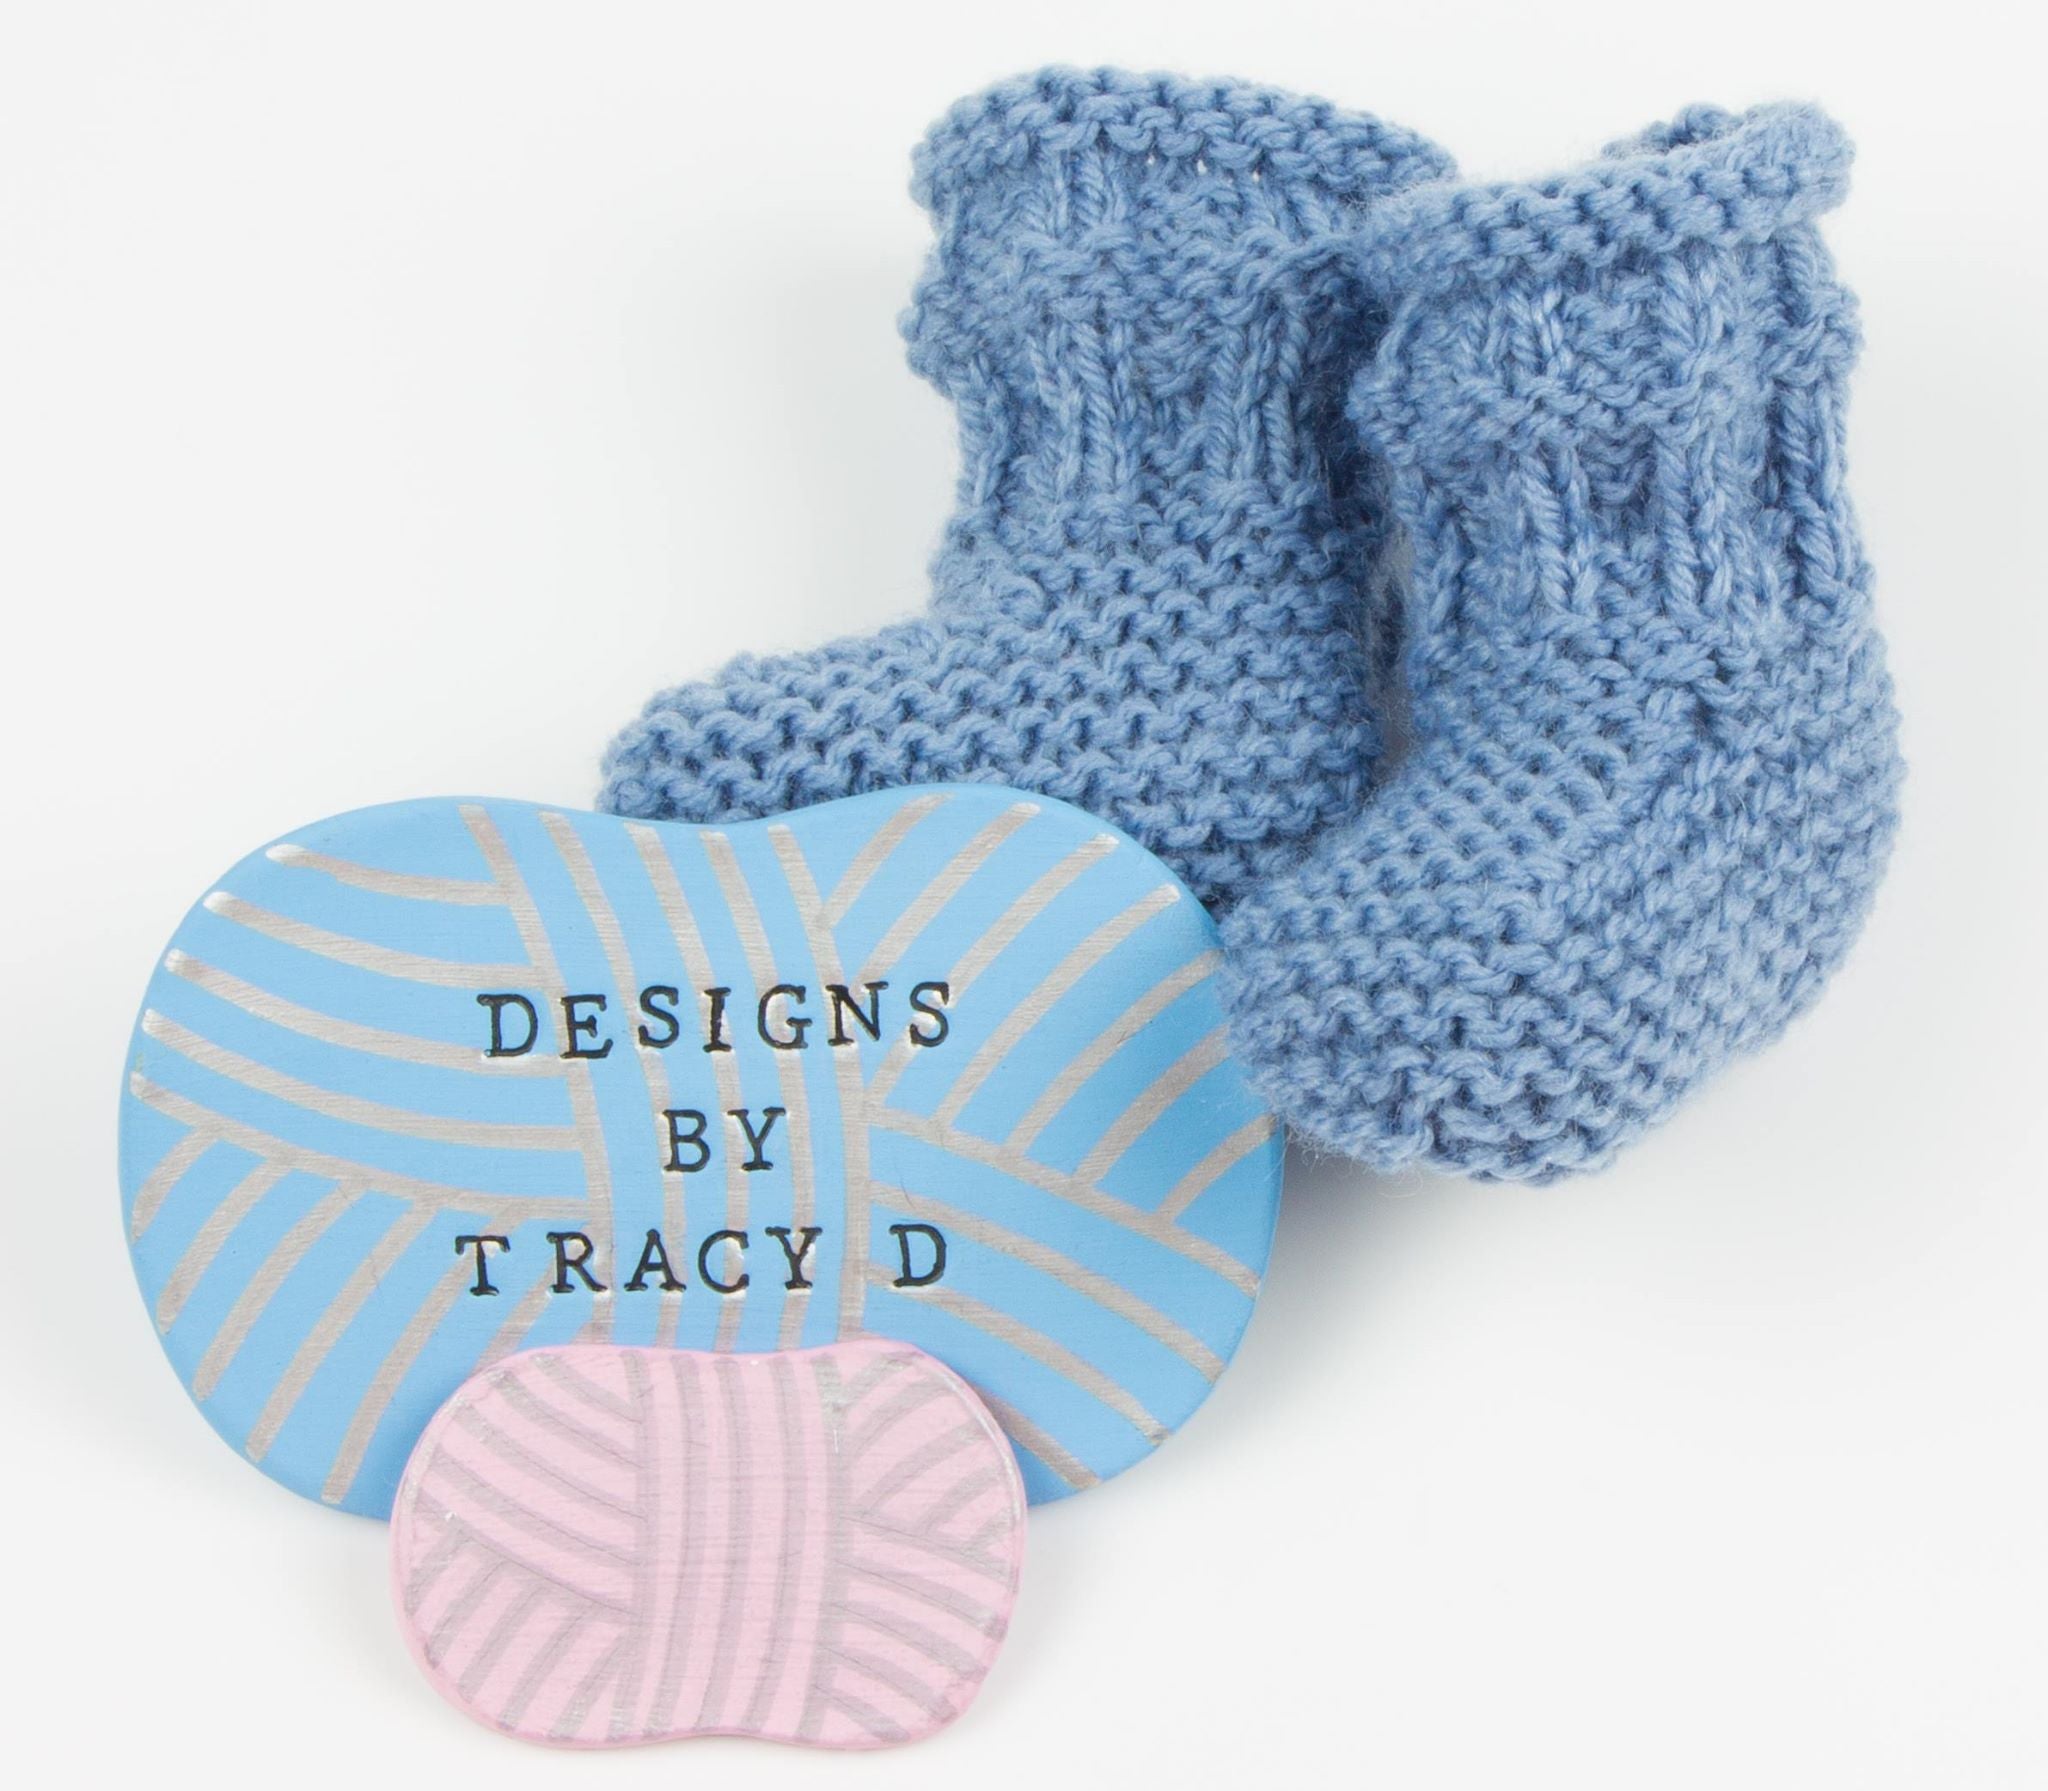 41. Riley (Unisex) - Download – Designs By Tracy D